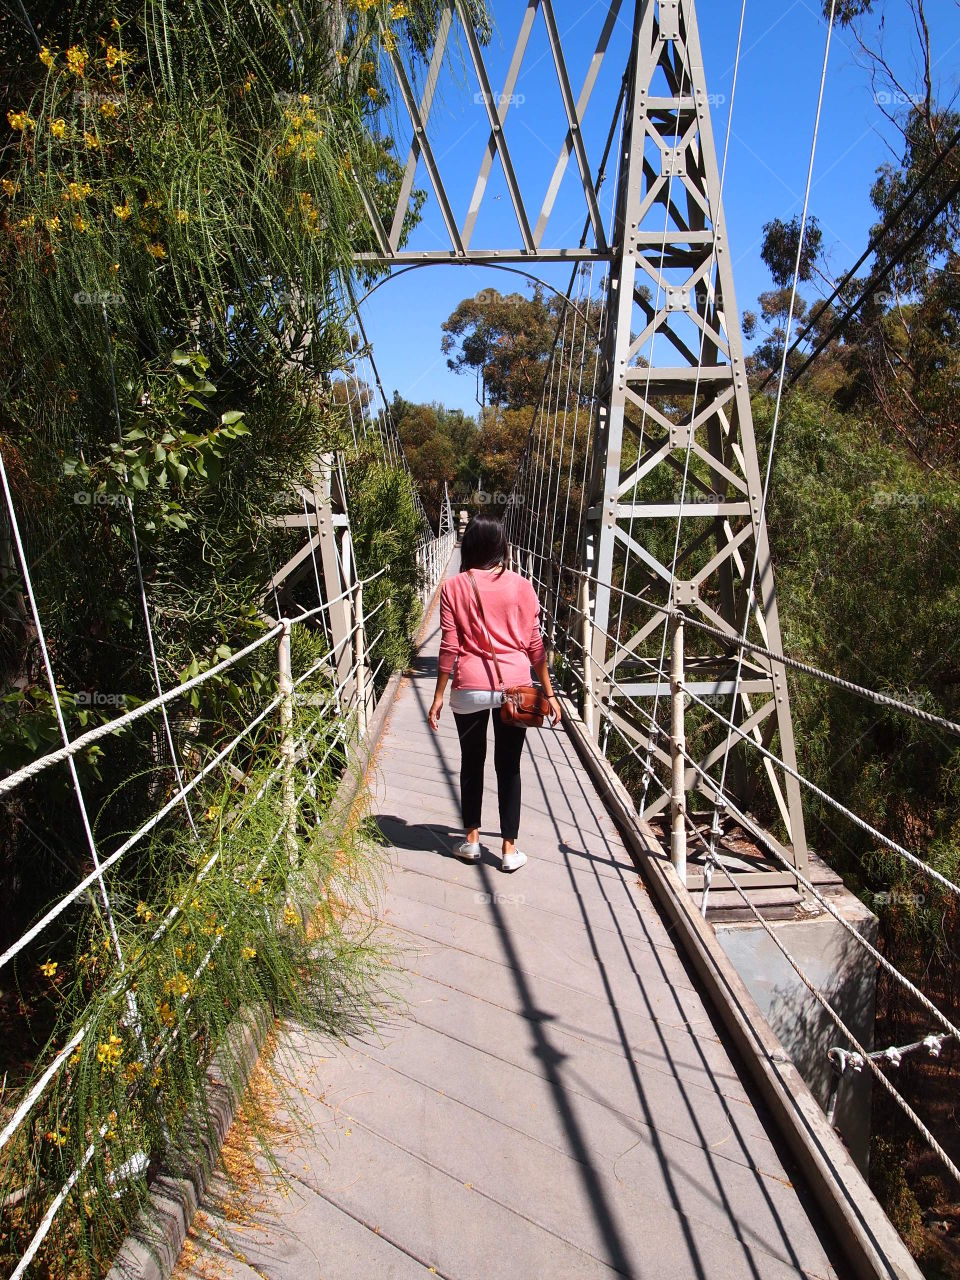 Strolling on the Suspension Bridge. Conquering my fear of heights. 